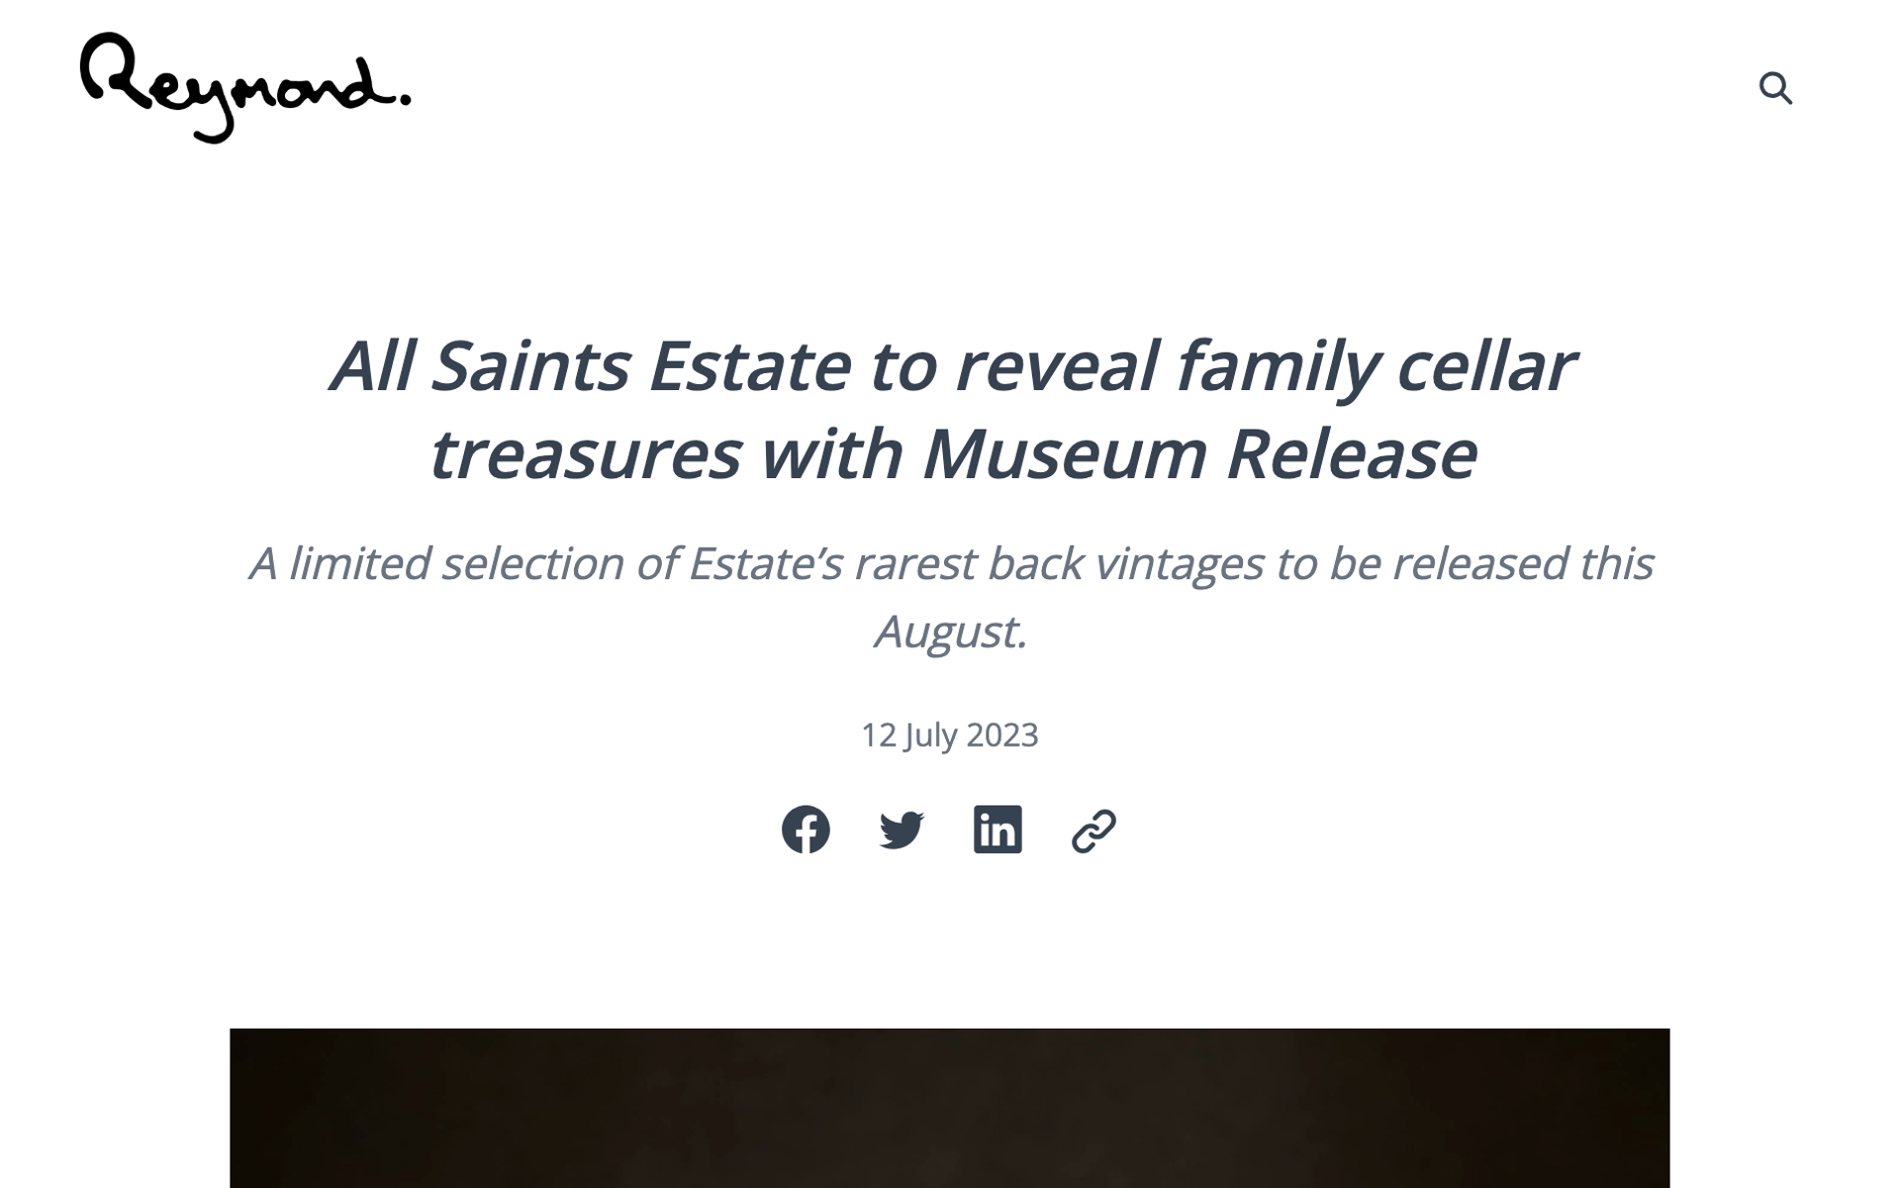 All Saints Estate to reveal family cellar treasures with Museum Release